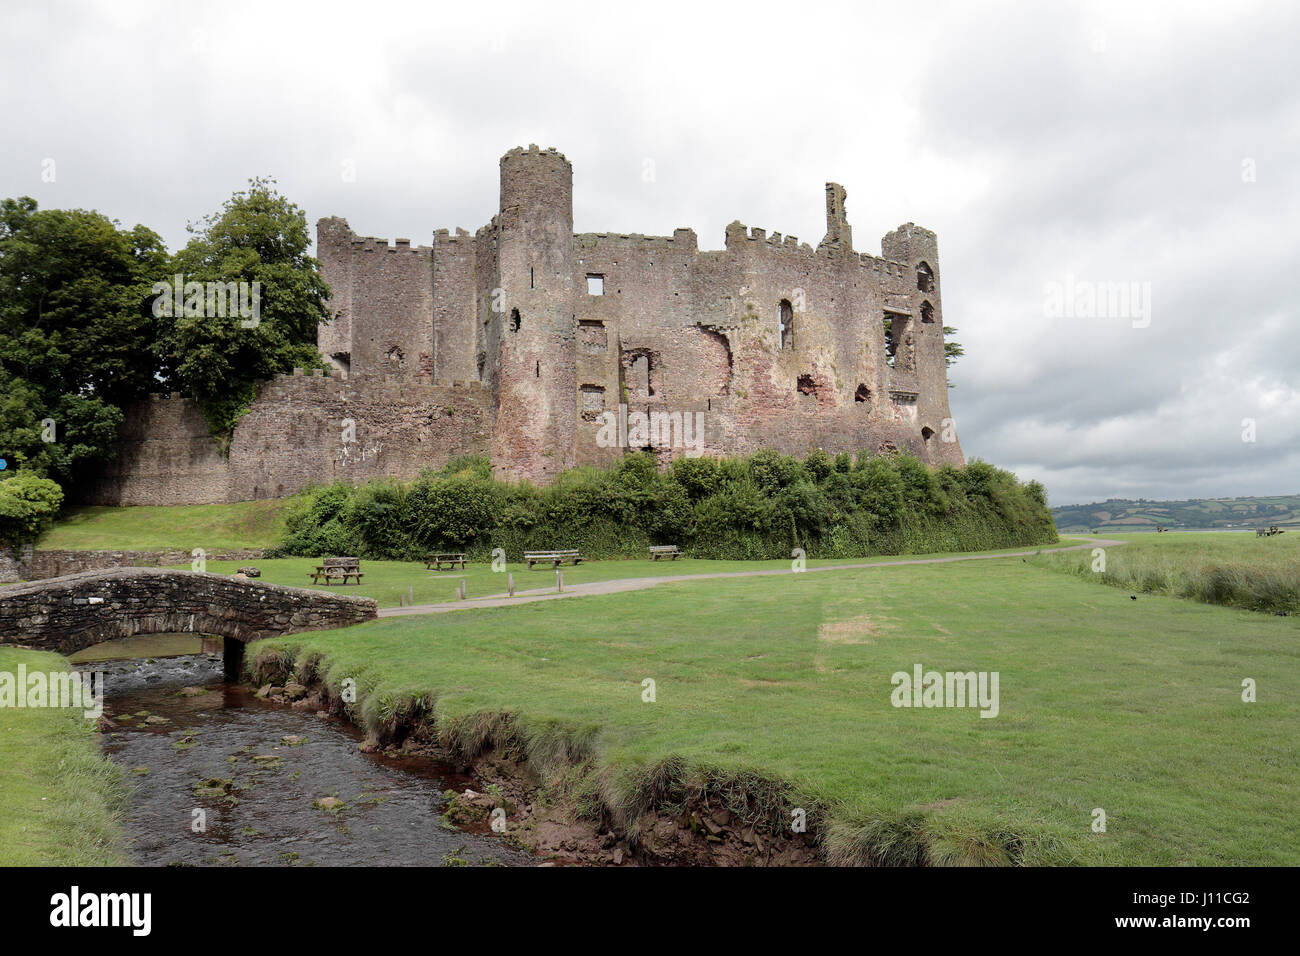 Laugharne castello in Laugharne, Dyfed Galles. Foto Stock